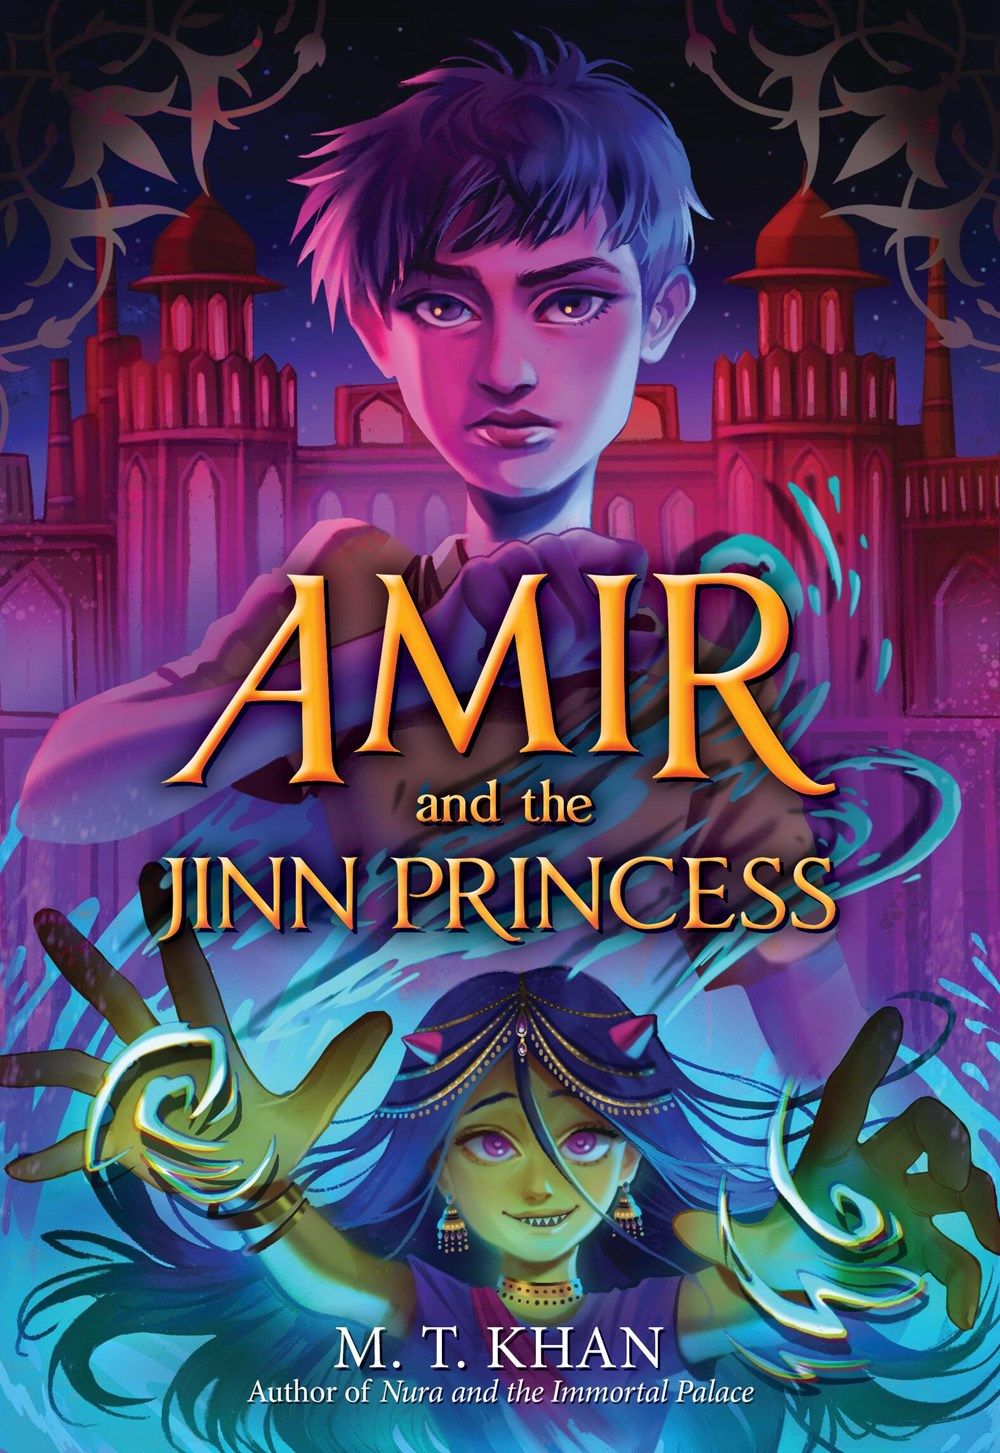 Cover of “Amir and the Jinn Princess” by MT Khan